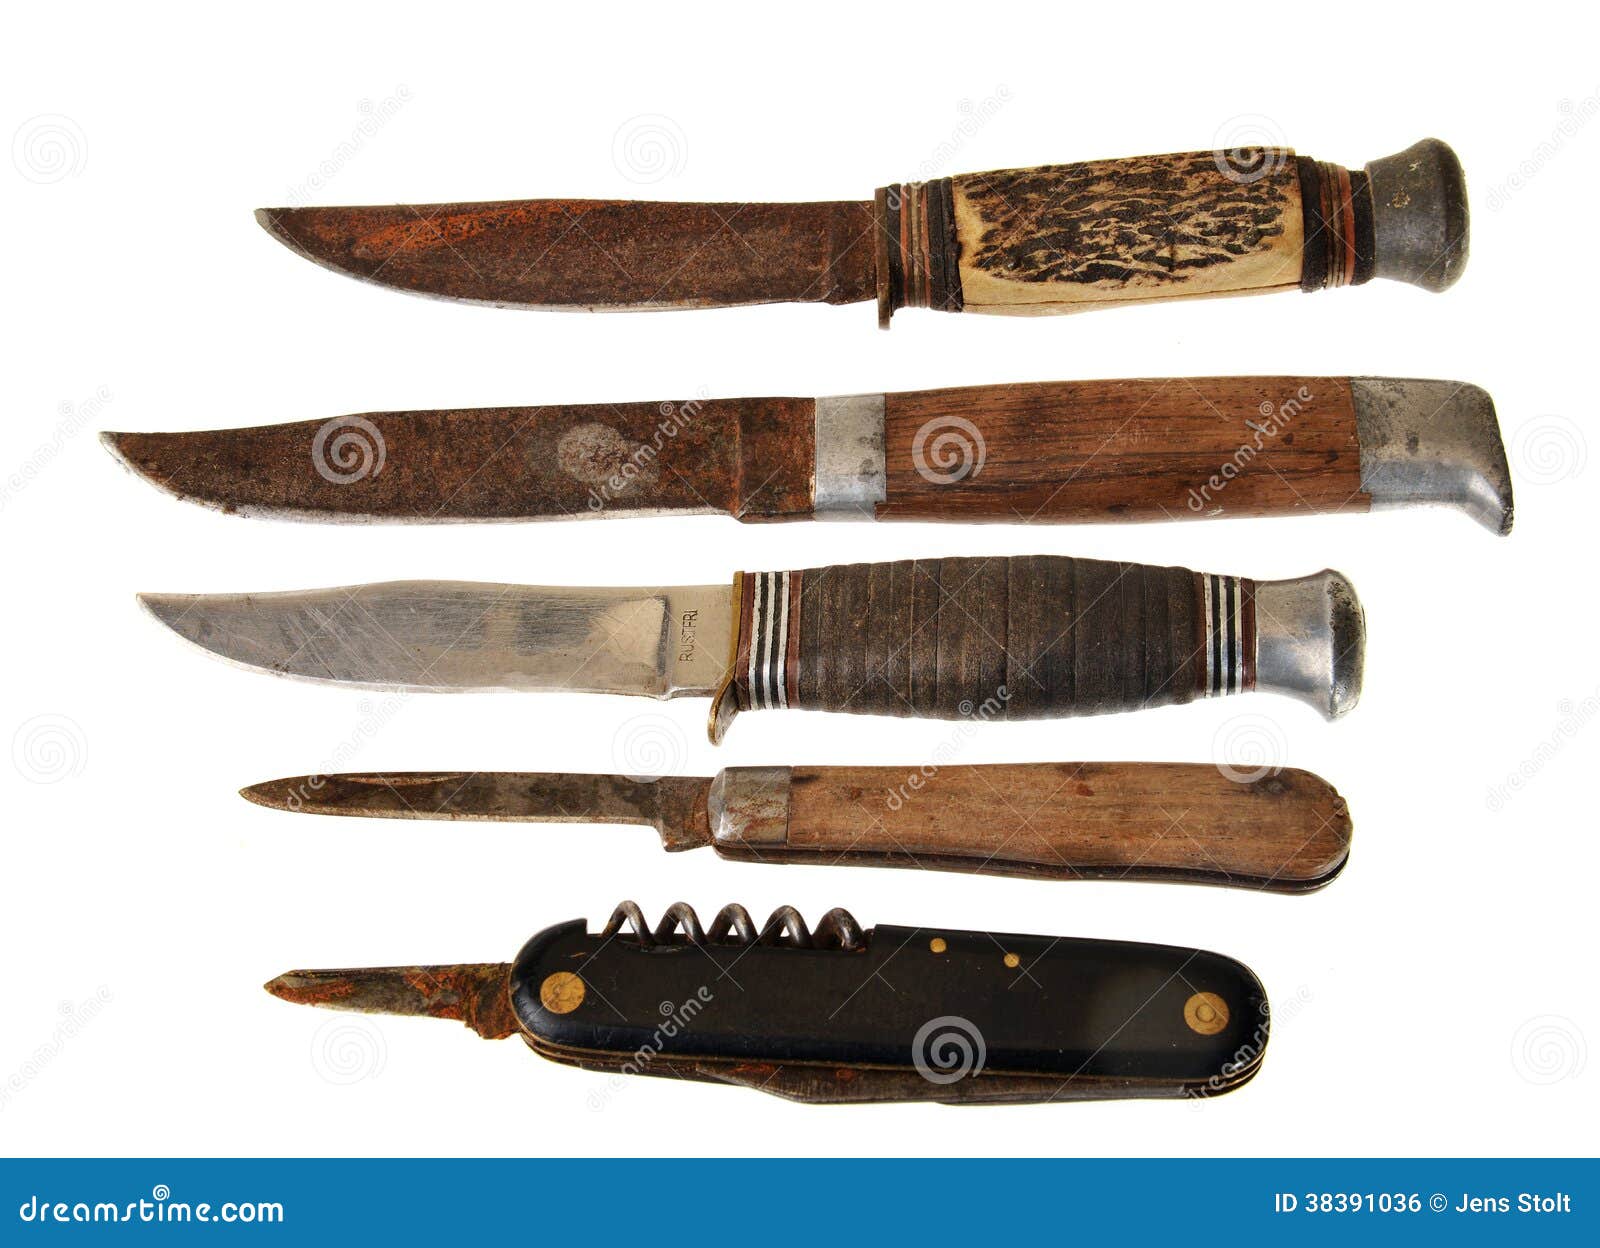 Set of old rusty knives stock photo. Image of vintage - 38391036